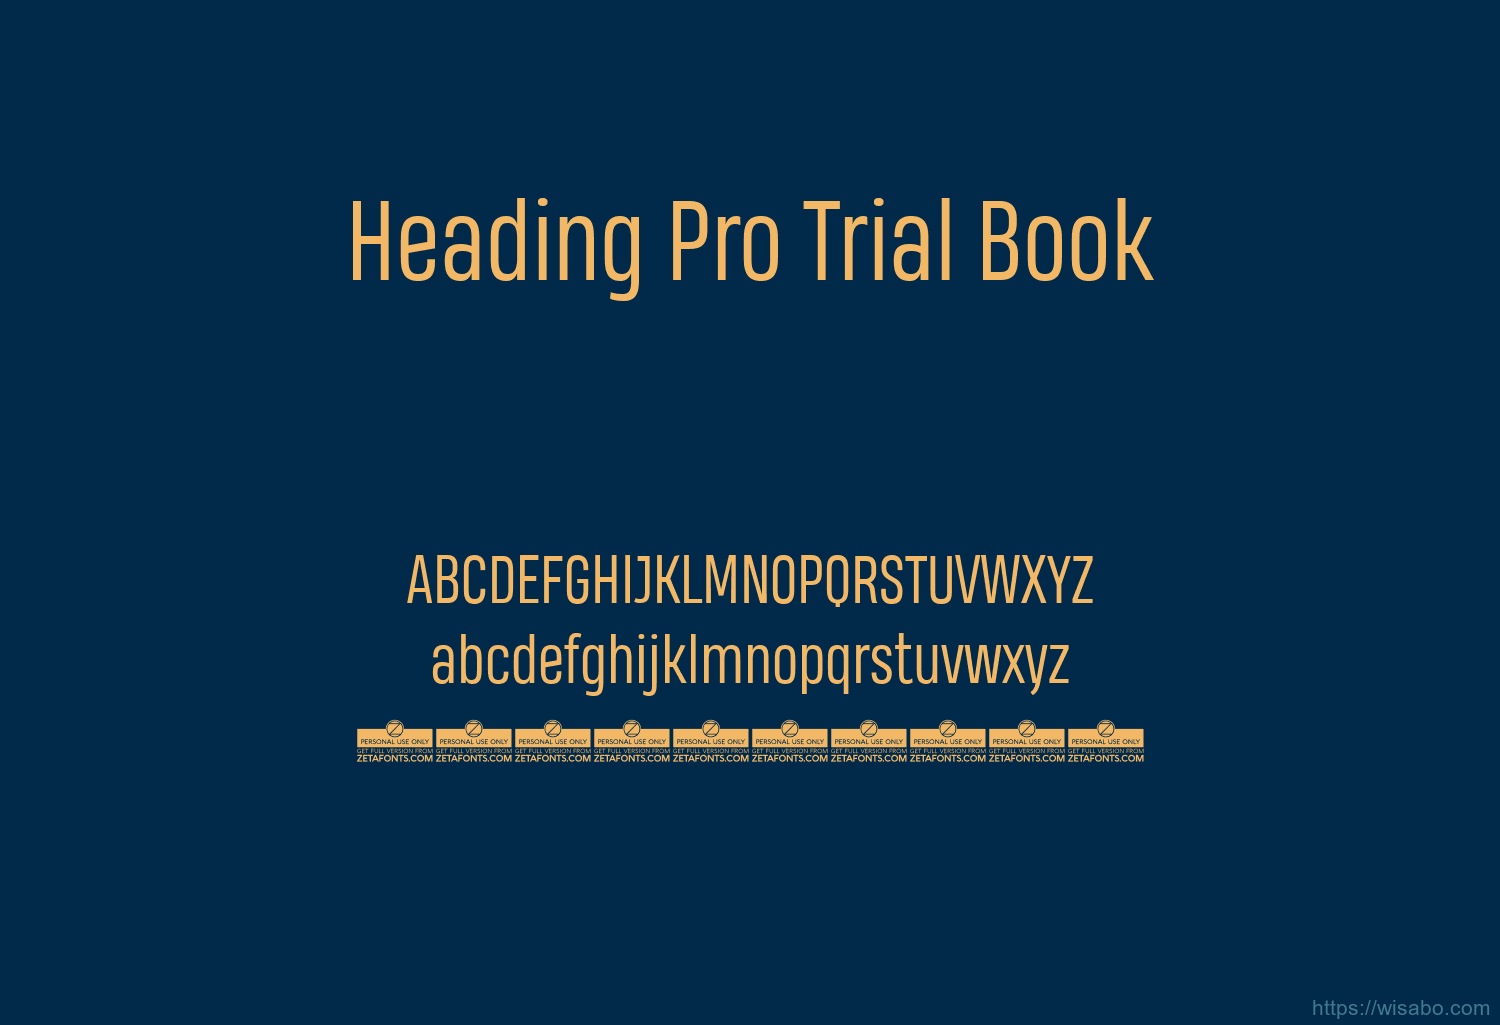 Heading Pro Trial Book